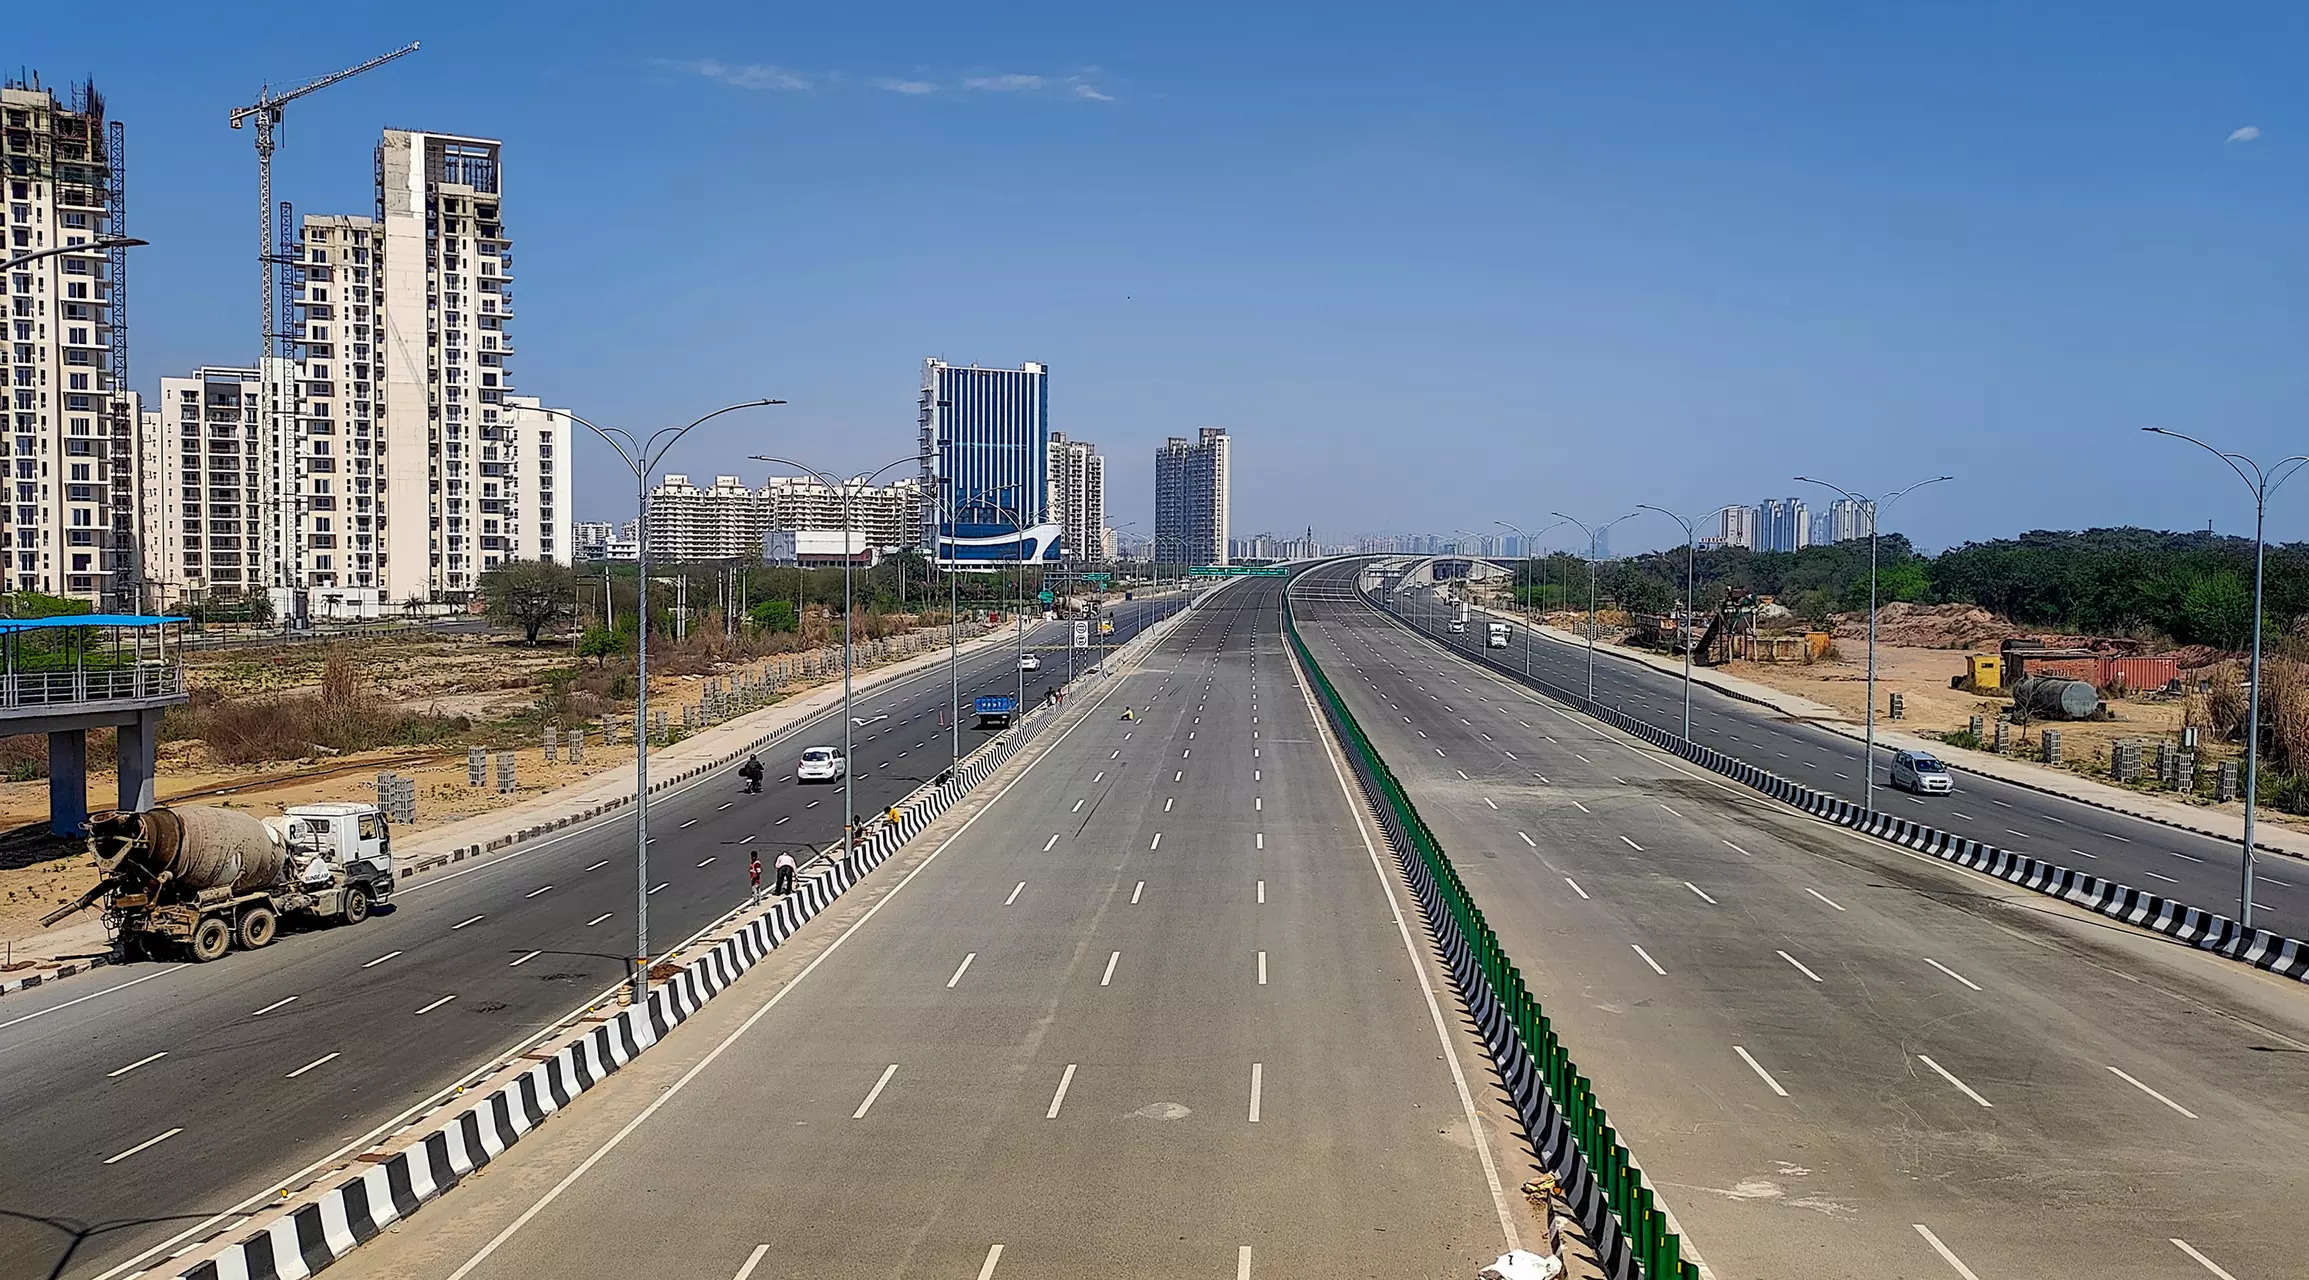 <p>Dwarka Expressway, the 29-km road, has been planned to provide an alternate link between Delhi and Gurgaon and thereby reduce traffic congestion.</p>